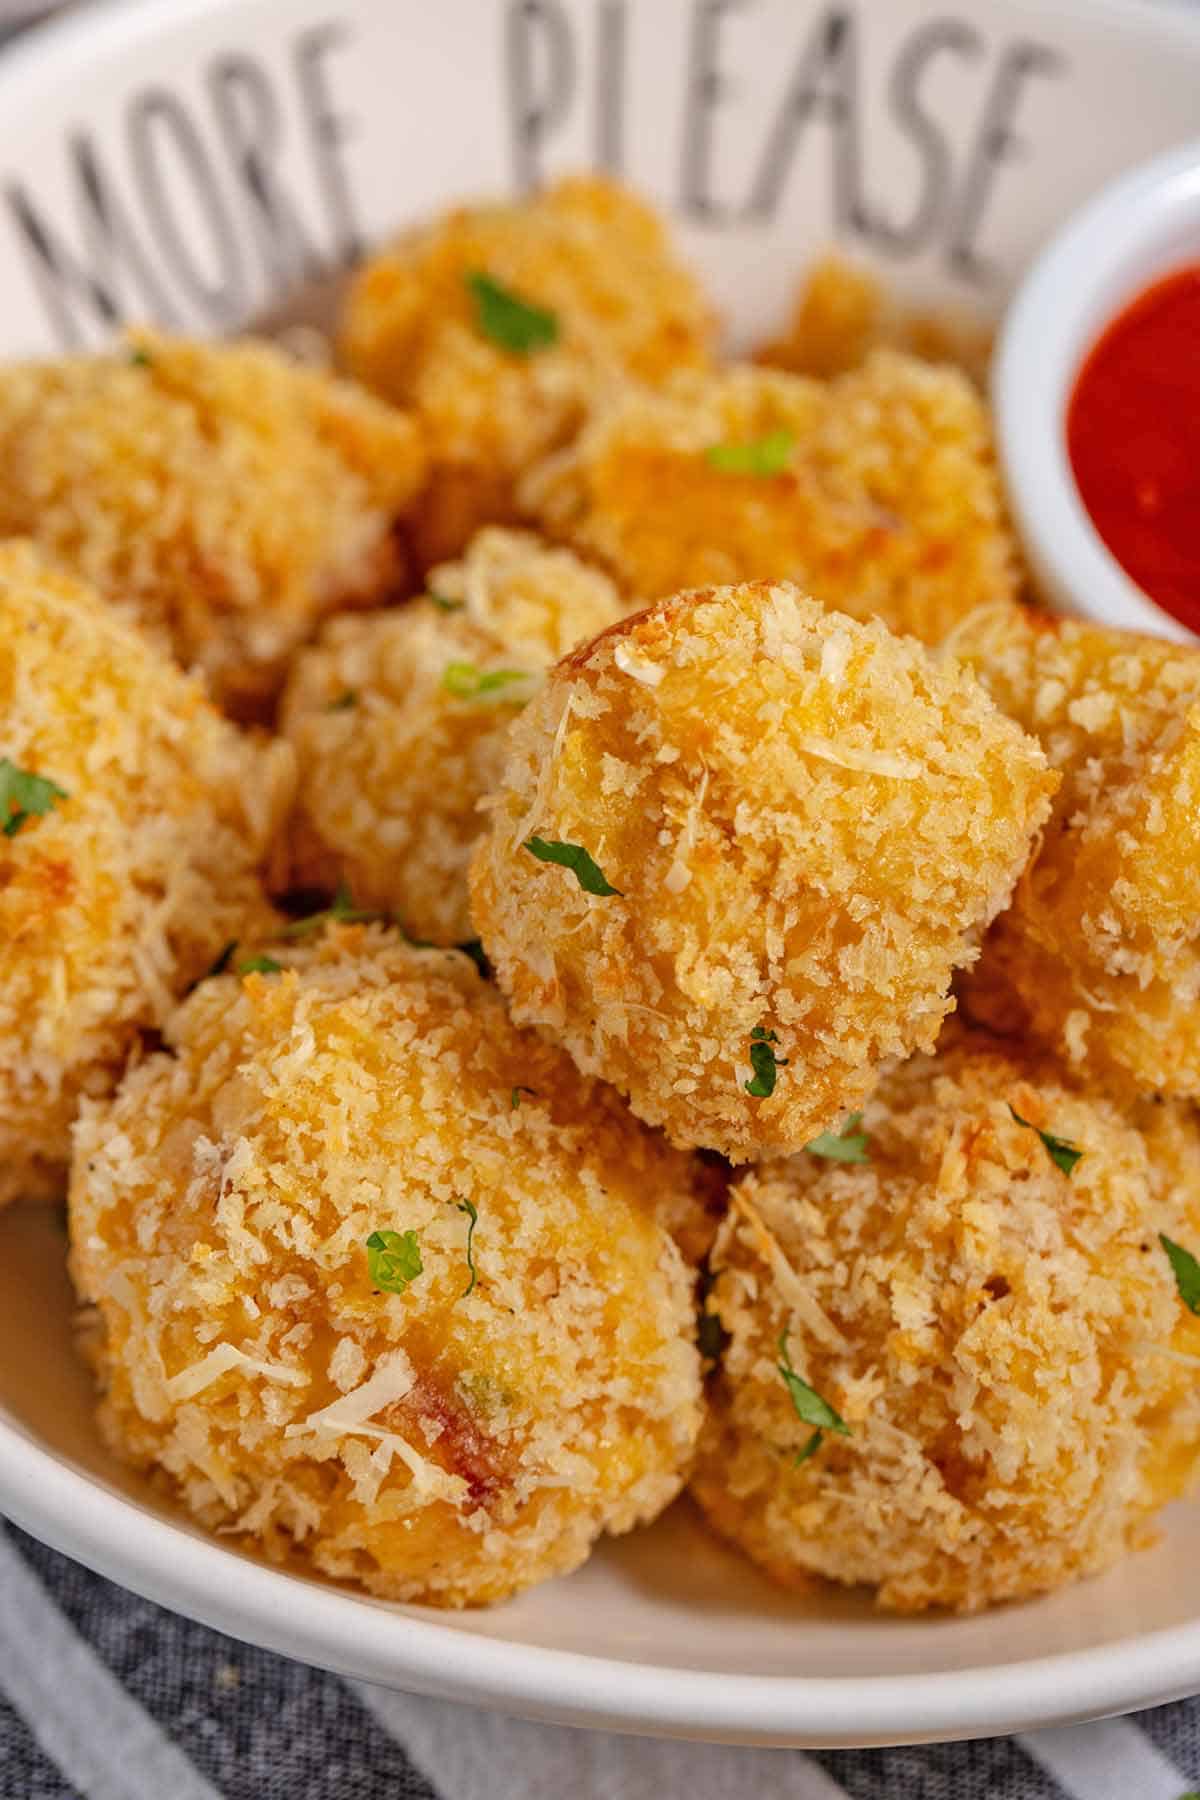 Platter of mac and cheese bites as a side dish.